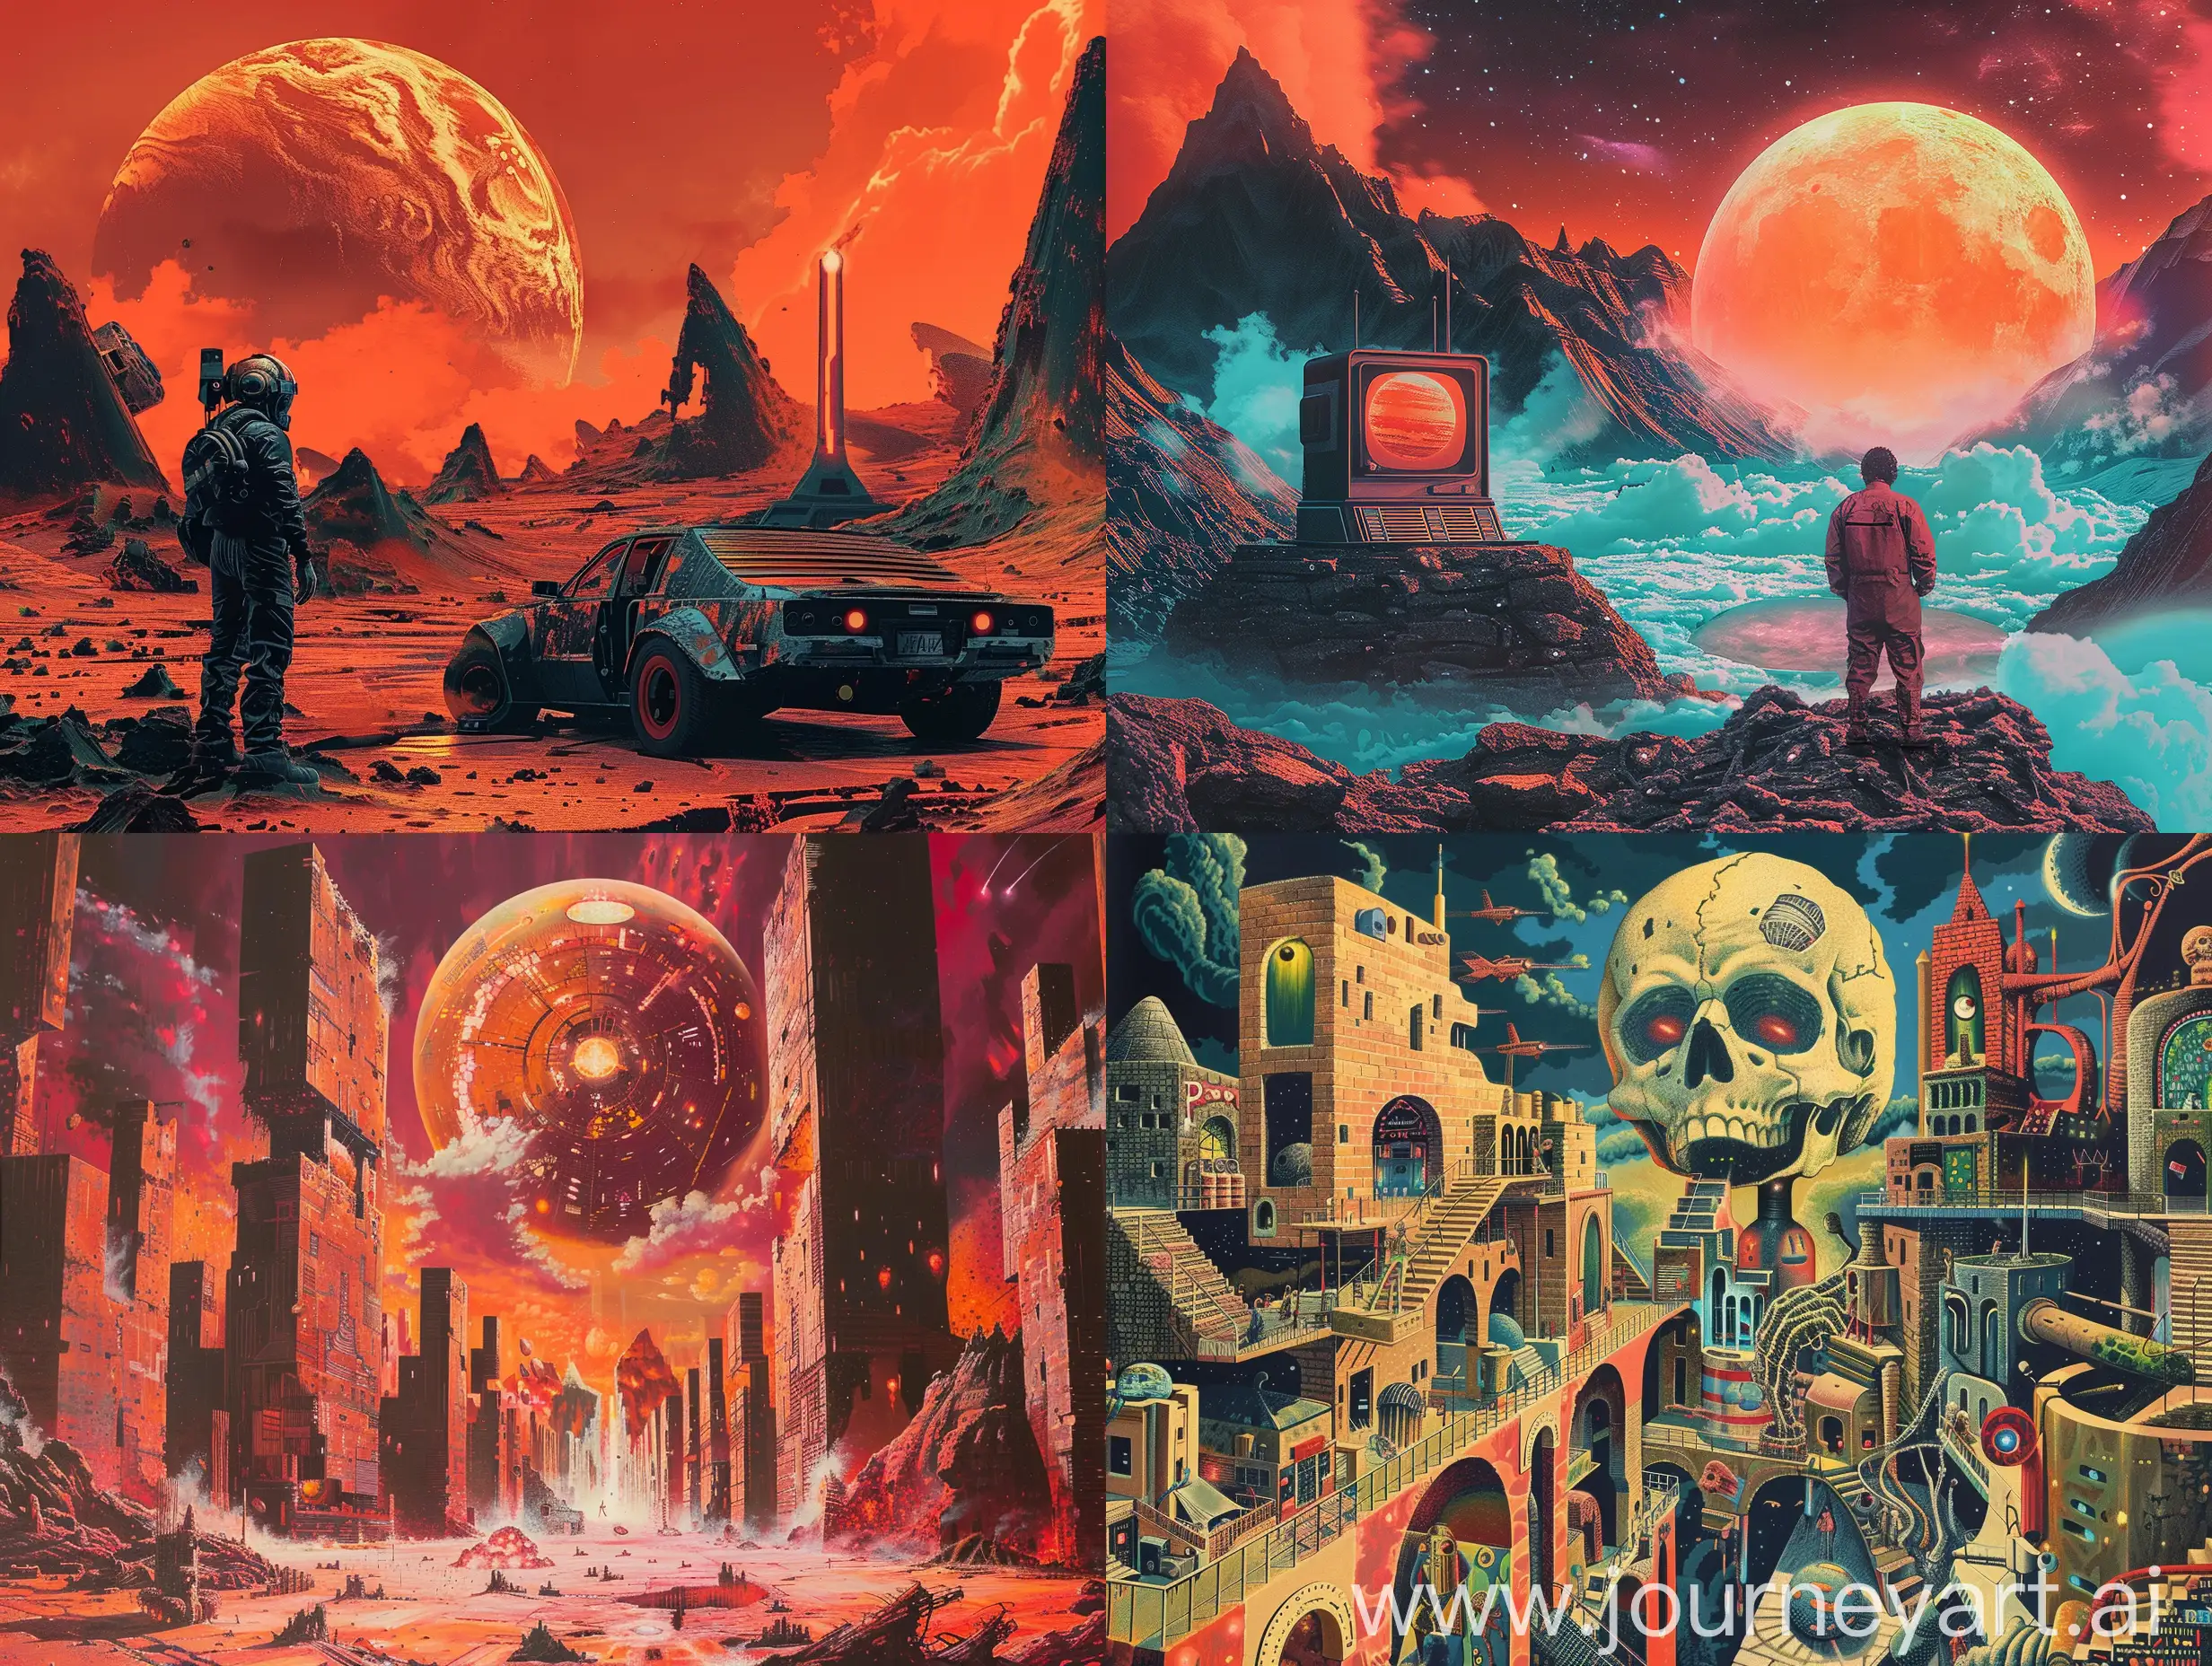 The illustration features a futuristic design with realistic textures and a retro-futuristic aesthetic. It depicts history of hell with a nostalgic 80s and 70s retrofuturism vibe. It is a full view artwork reminiscent of Norman Rockwell's painting.


